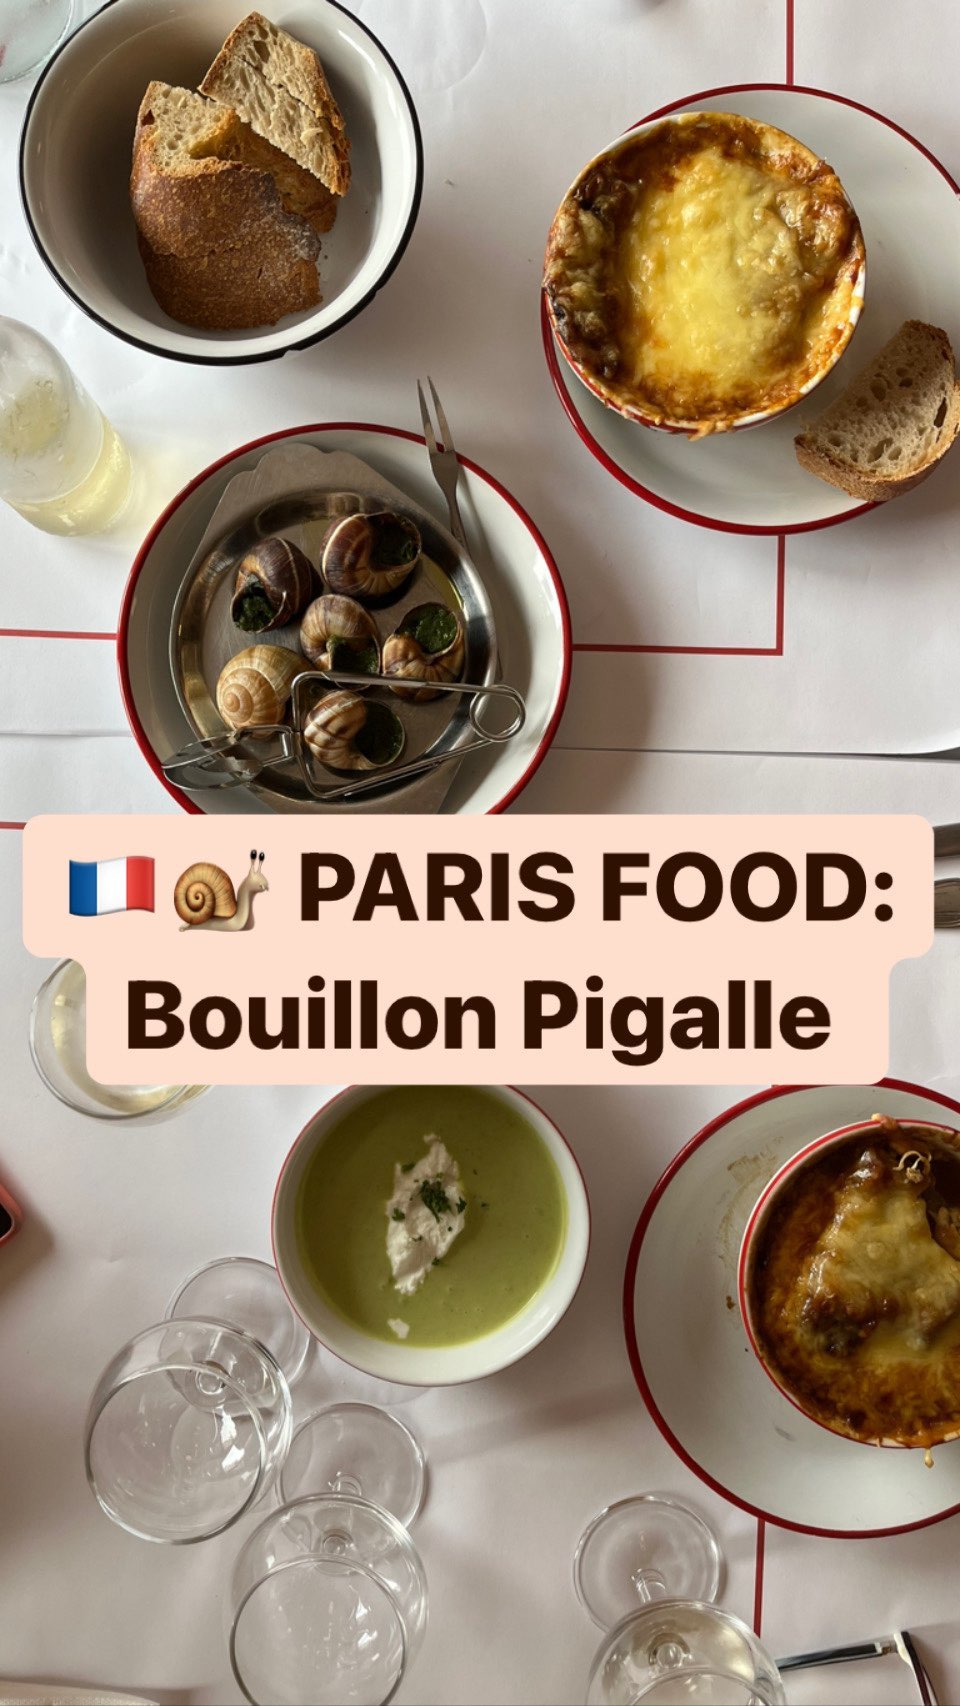 🇫🇷🐌 PARIS FOOD: this is one of my of my favorite places in Pigalle for décent well priced traditional French food. A stones throw from Moulin Rouge 
/
Want to try Snails and French Onion Soup??😜😋🤗
/
And they have a new location near metro République too. 
#parisfood #myparisianlife #paris #travelerinparis #seemyparis #paristourguide #montmartremylove